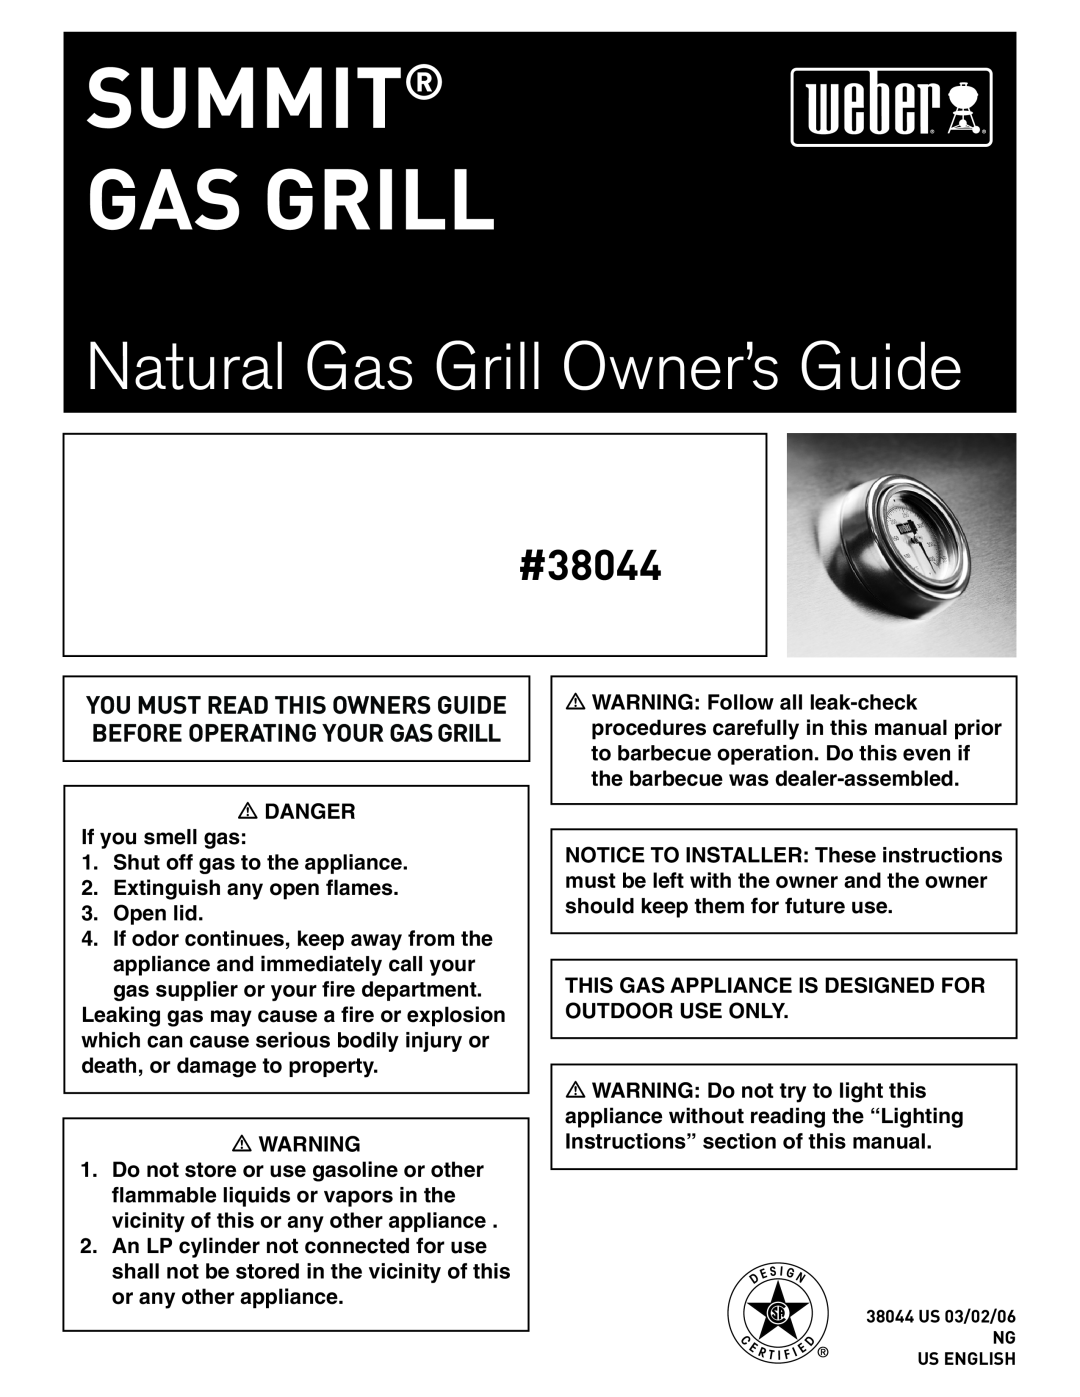 Weber manual Summit Gas Grill, Natural Gas Grill Owner’s Guide, #38044 